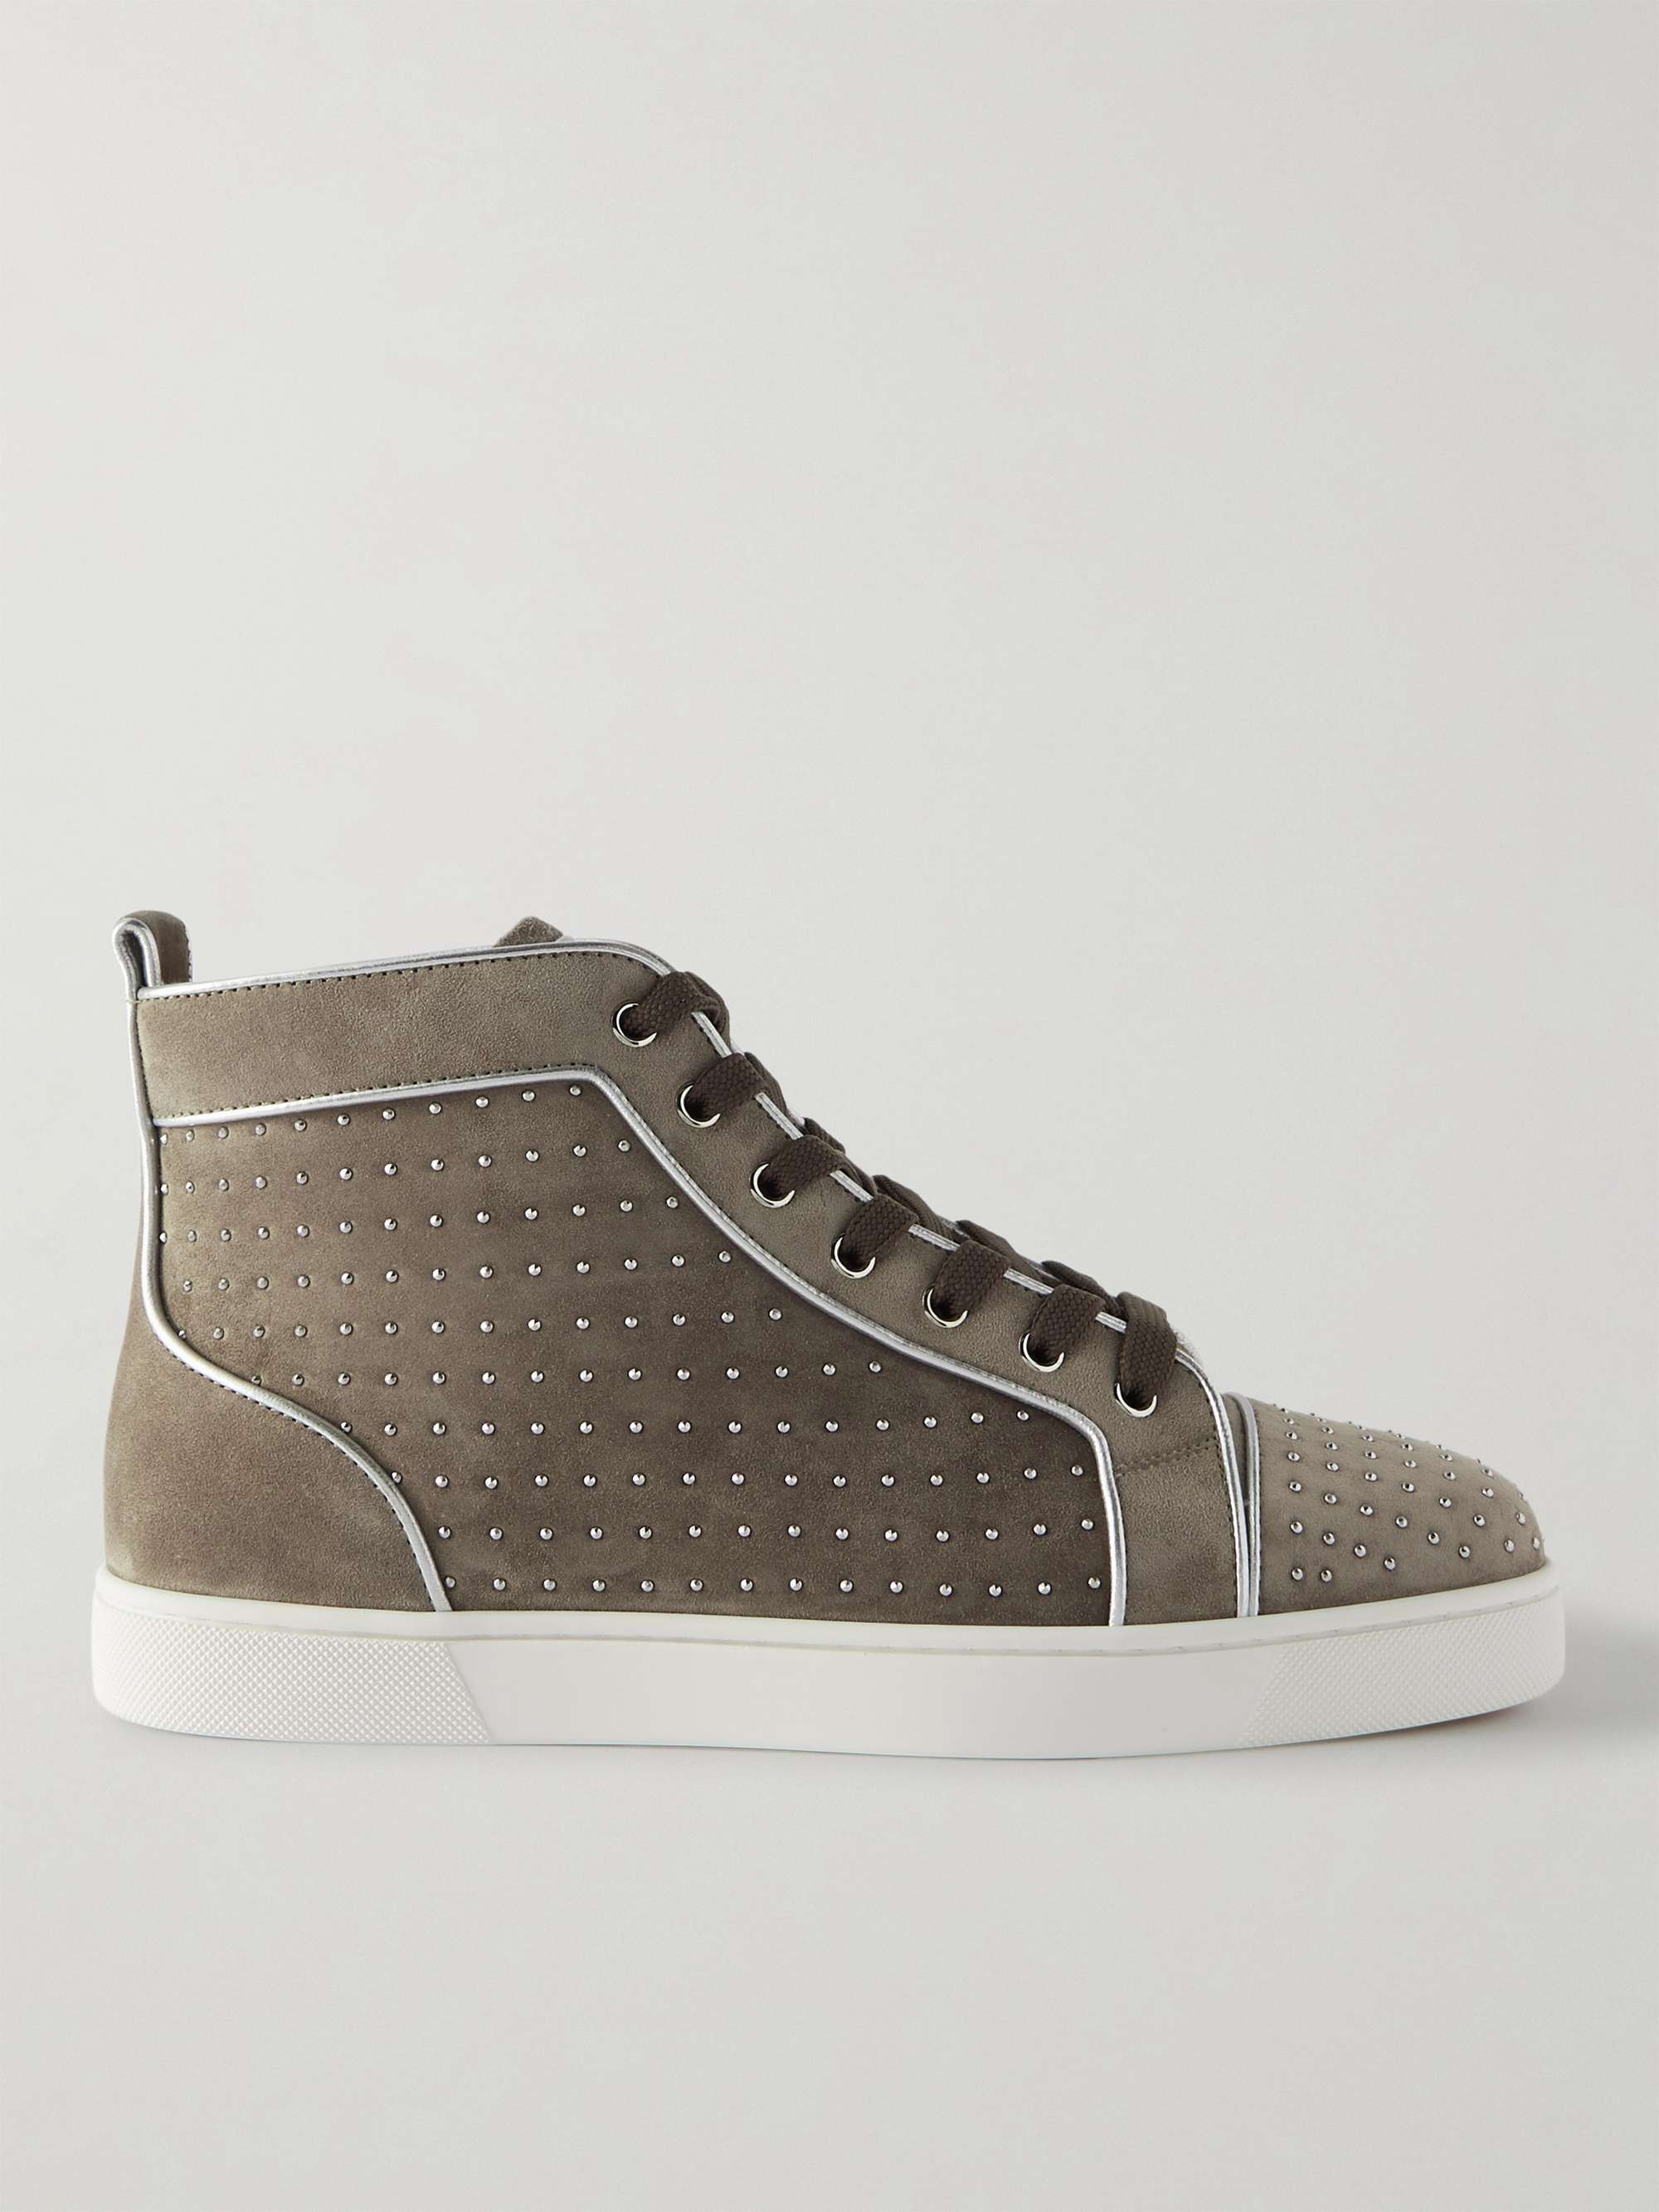 CHRISTIAN LOUBOUTIN Louis Plume Leather-Trimmed Studded Suede High-Top Sneakers